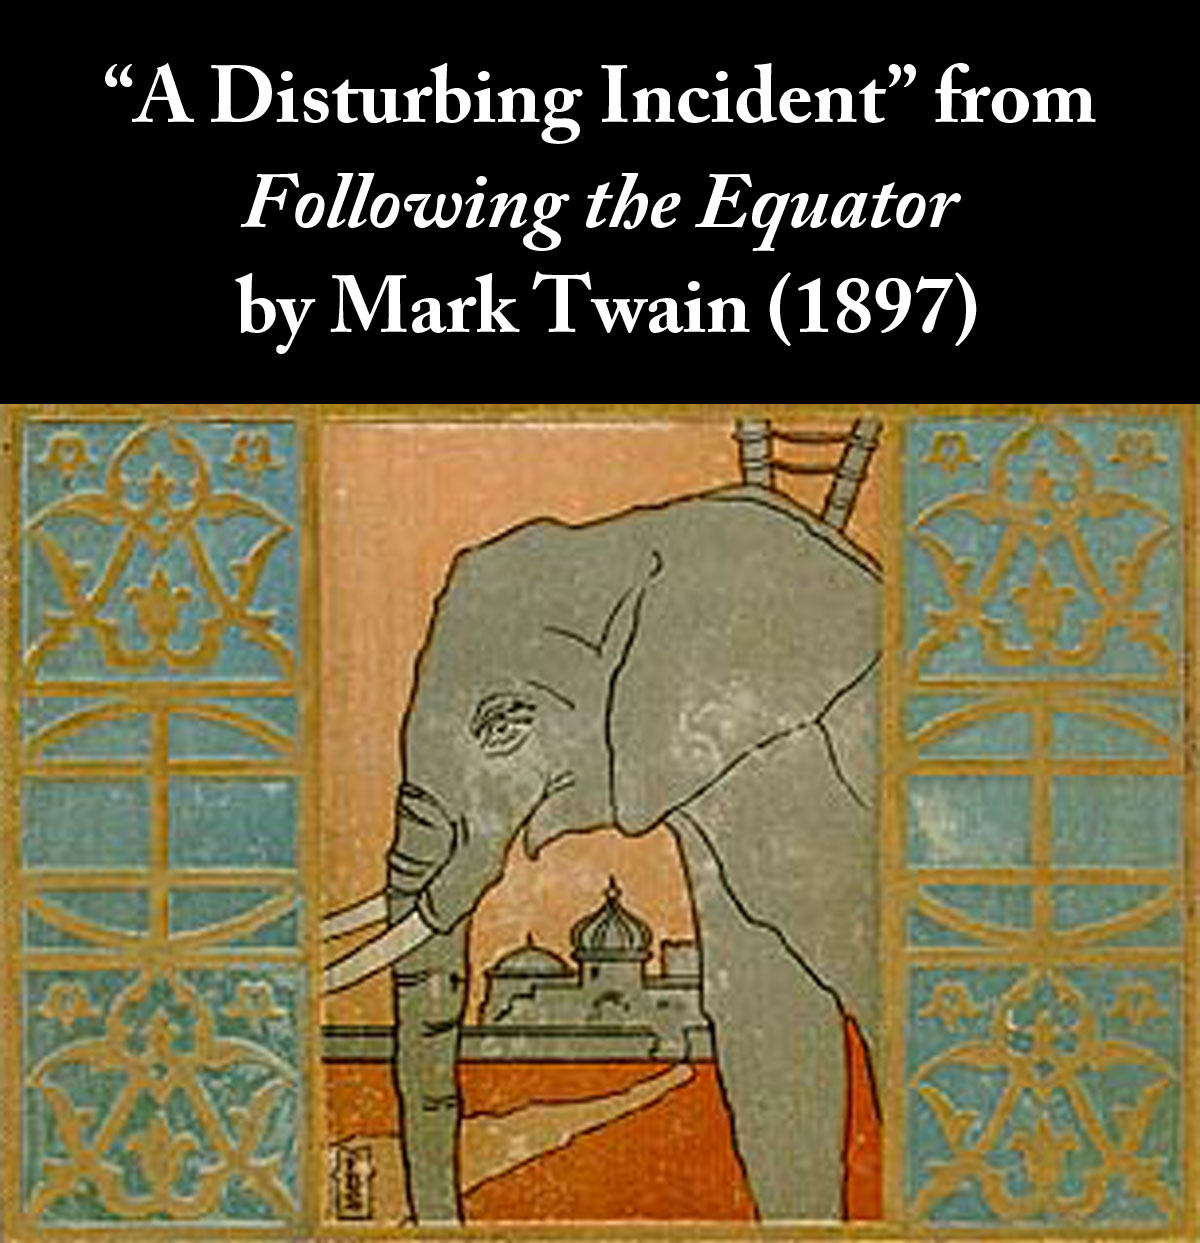 A Disturbing Incident from Following the Equator by Mark Twain (1897)